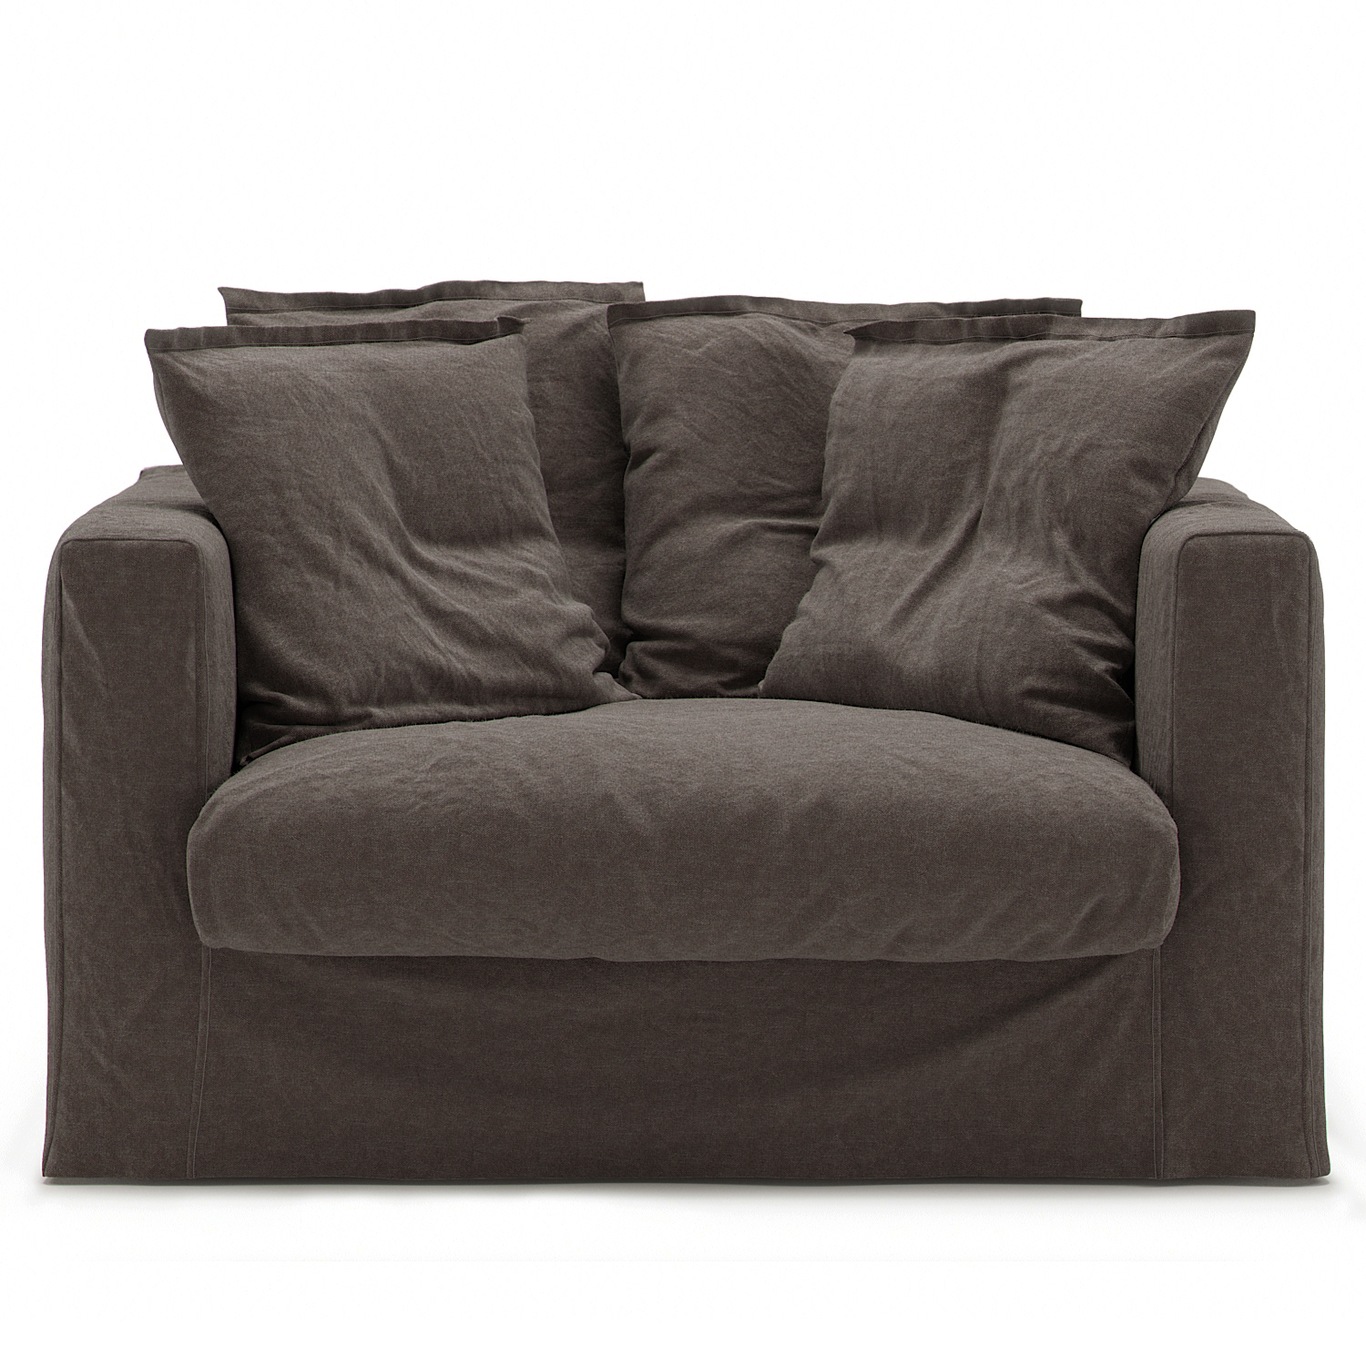 Le Grand Air Loveseat Upholstery Linen, Truffle Brown